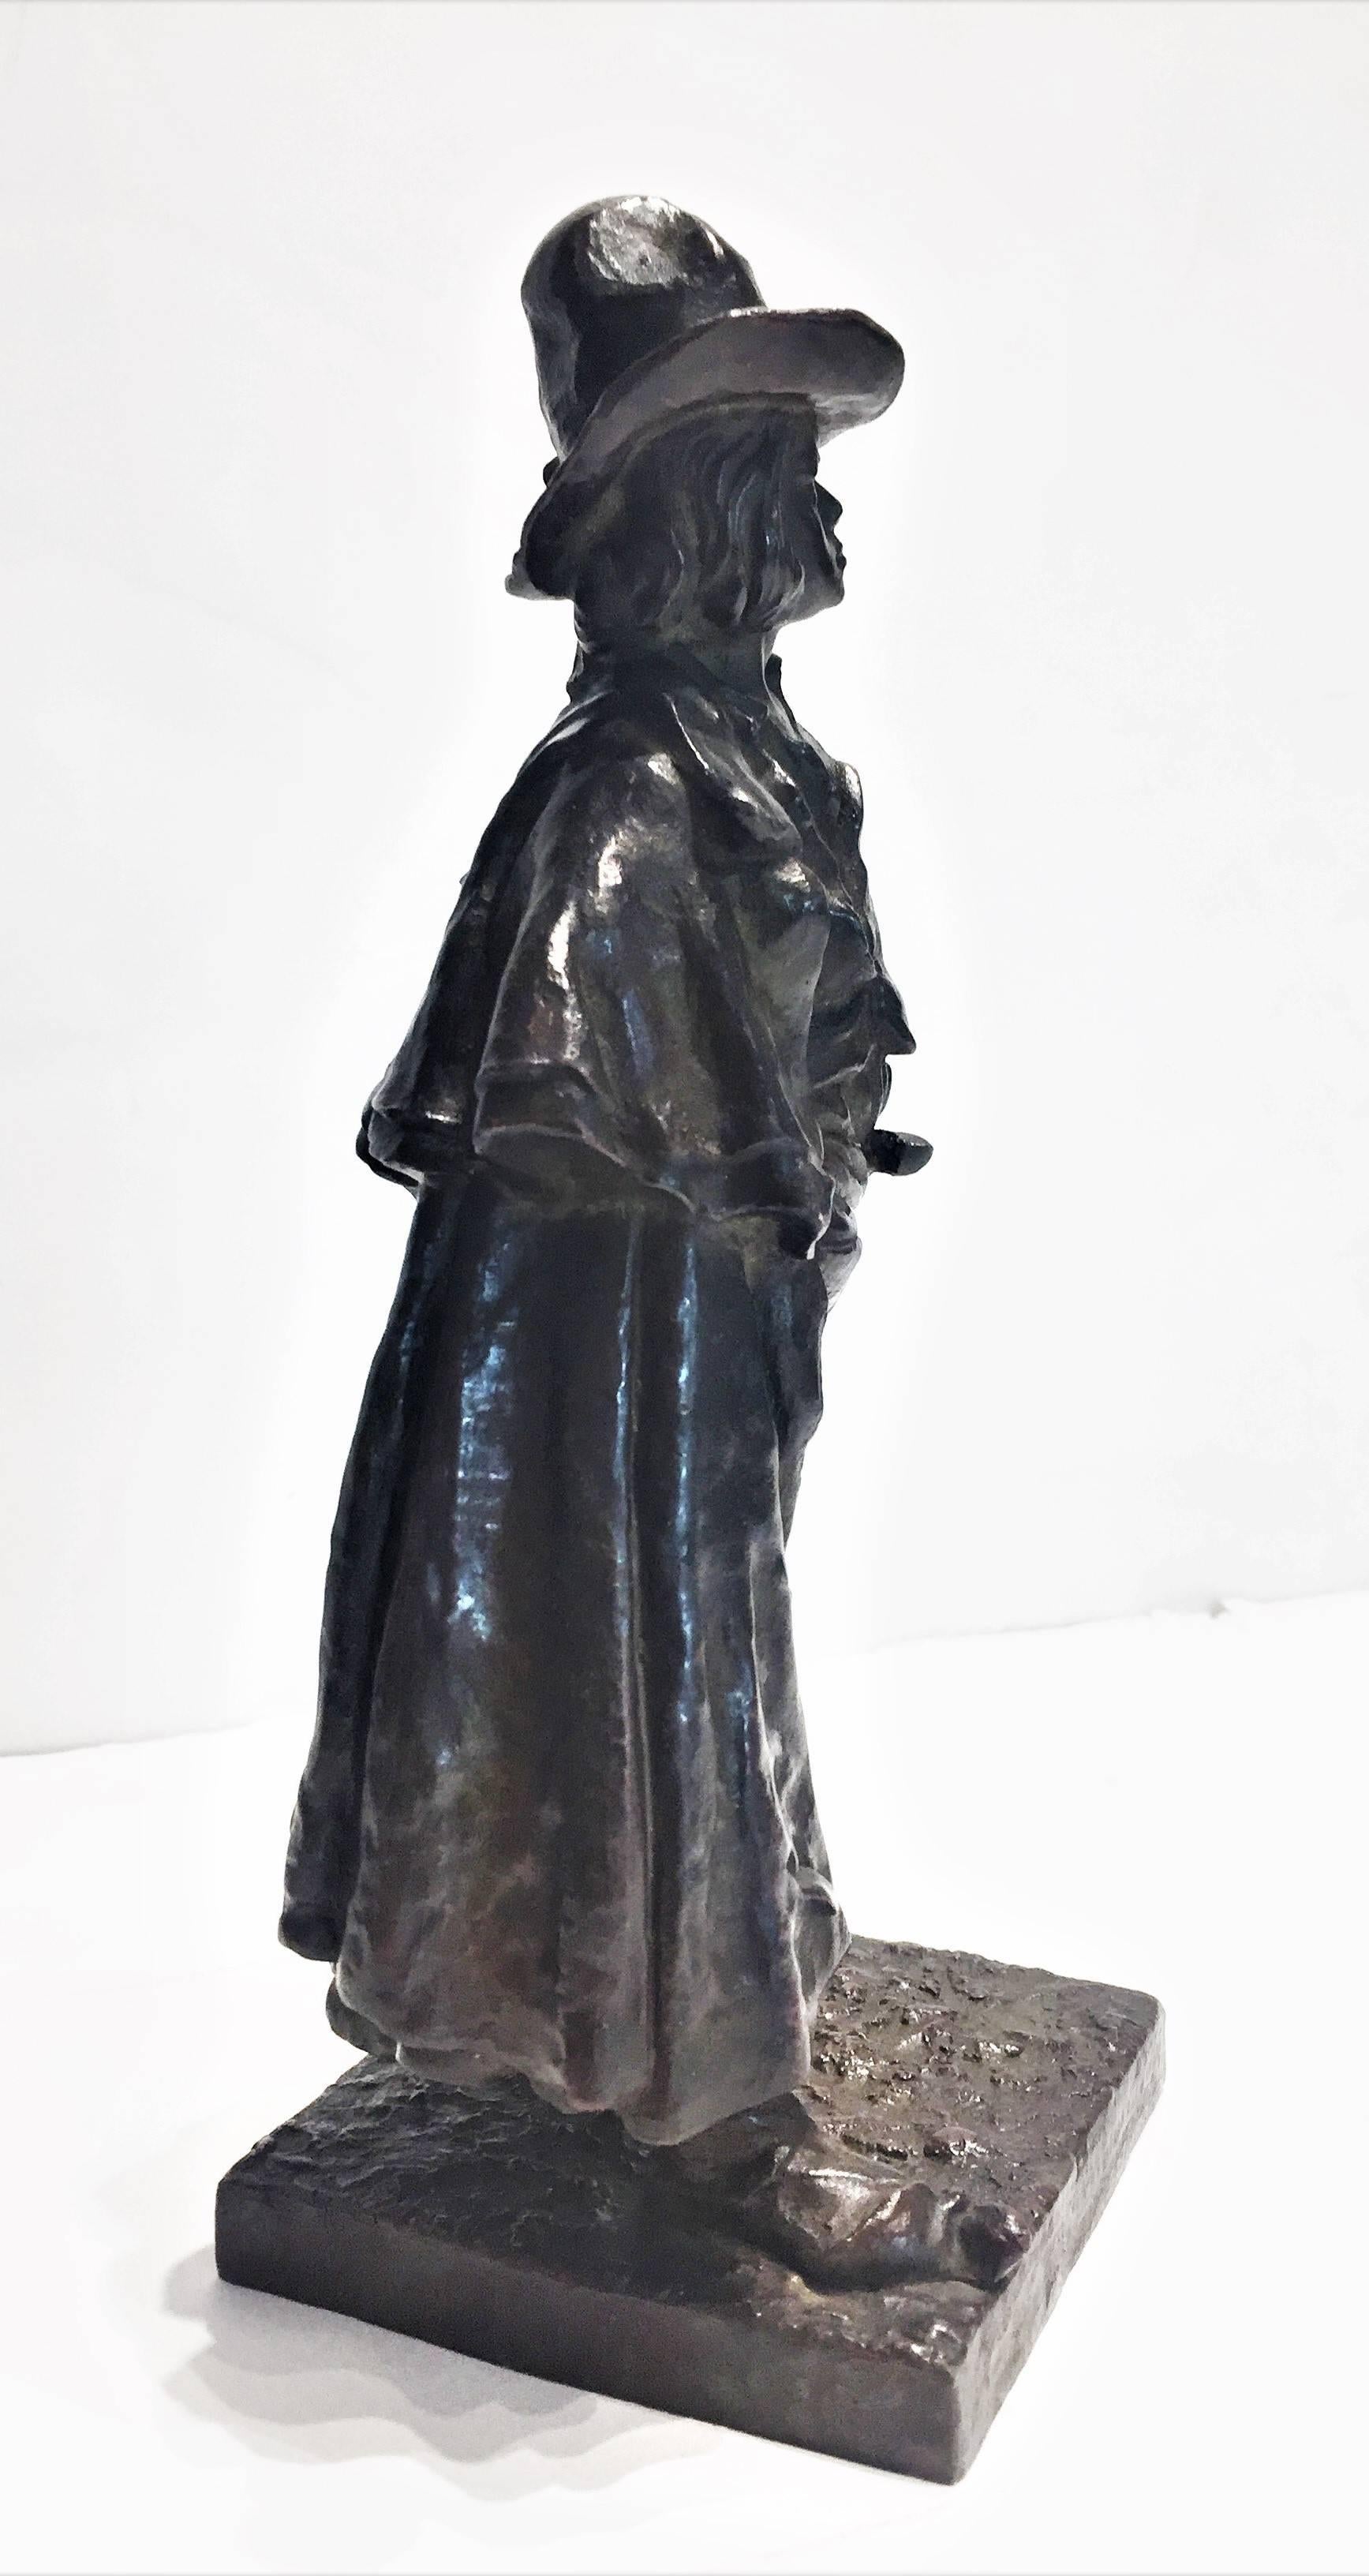 French Robert T. Delandre & Gorham Foundry, A Rover, Patinated Bronze Sculpture, 1906 For Sale